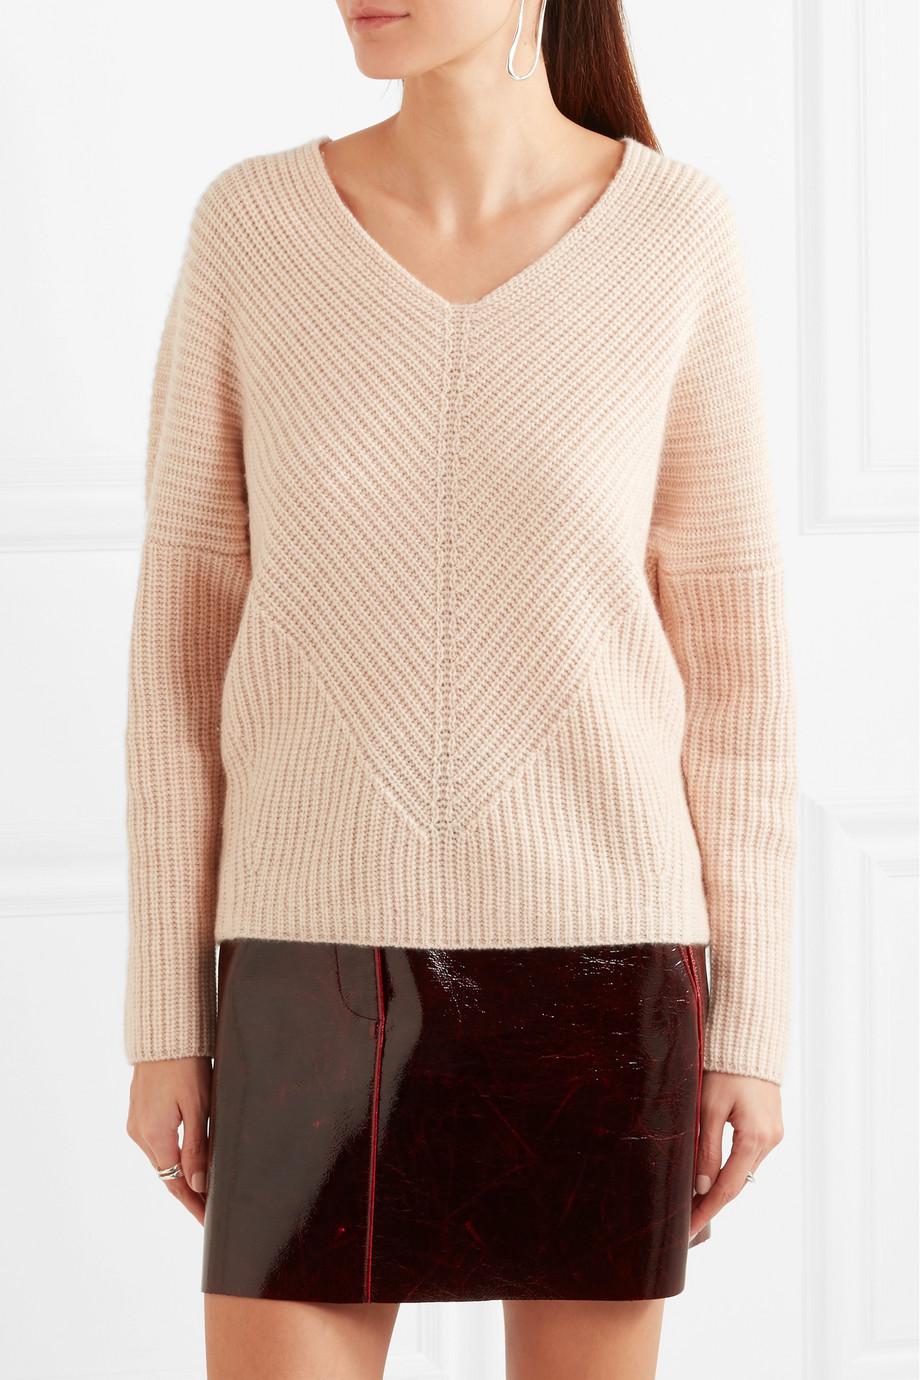 Maje Ribbed Cashmere Sweater in Natural - Lyst